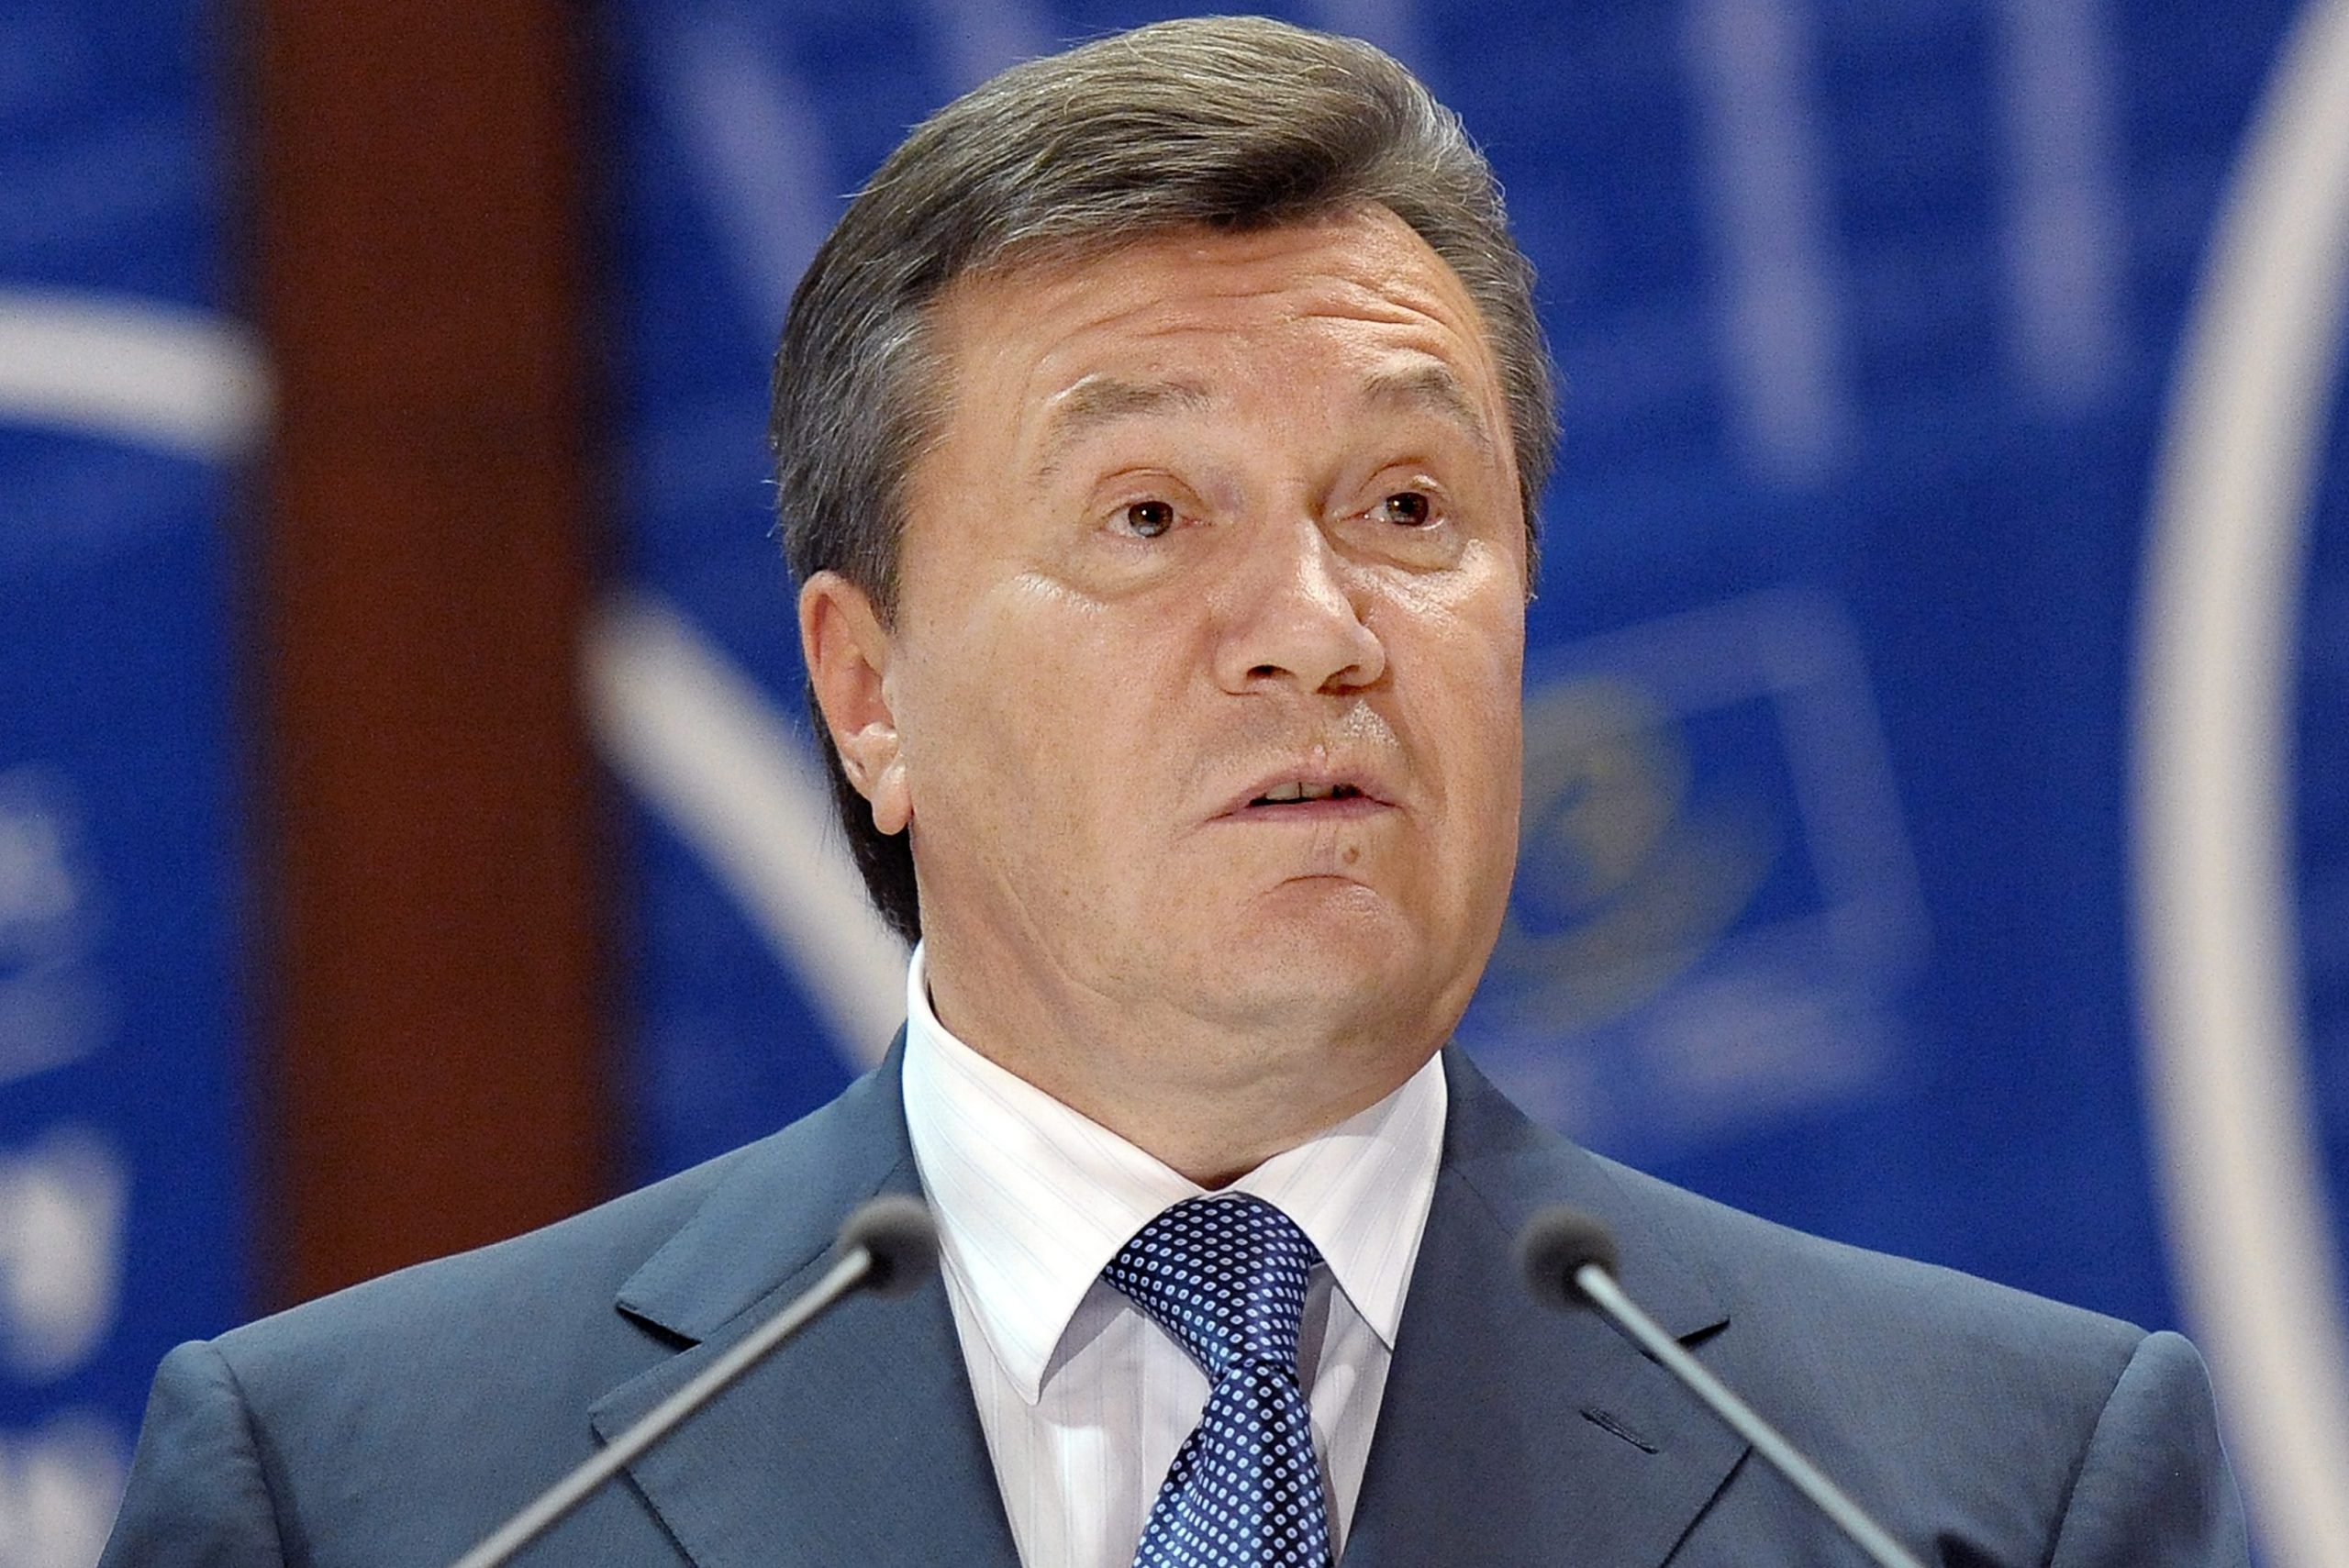 Where is the Yanukovych regime five years after the Euromaidan revolution